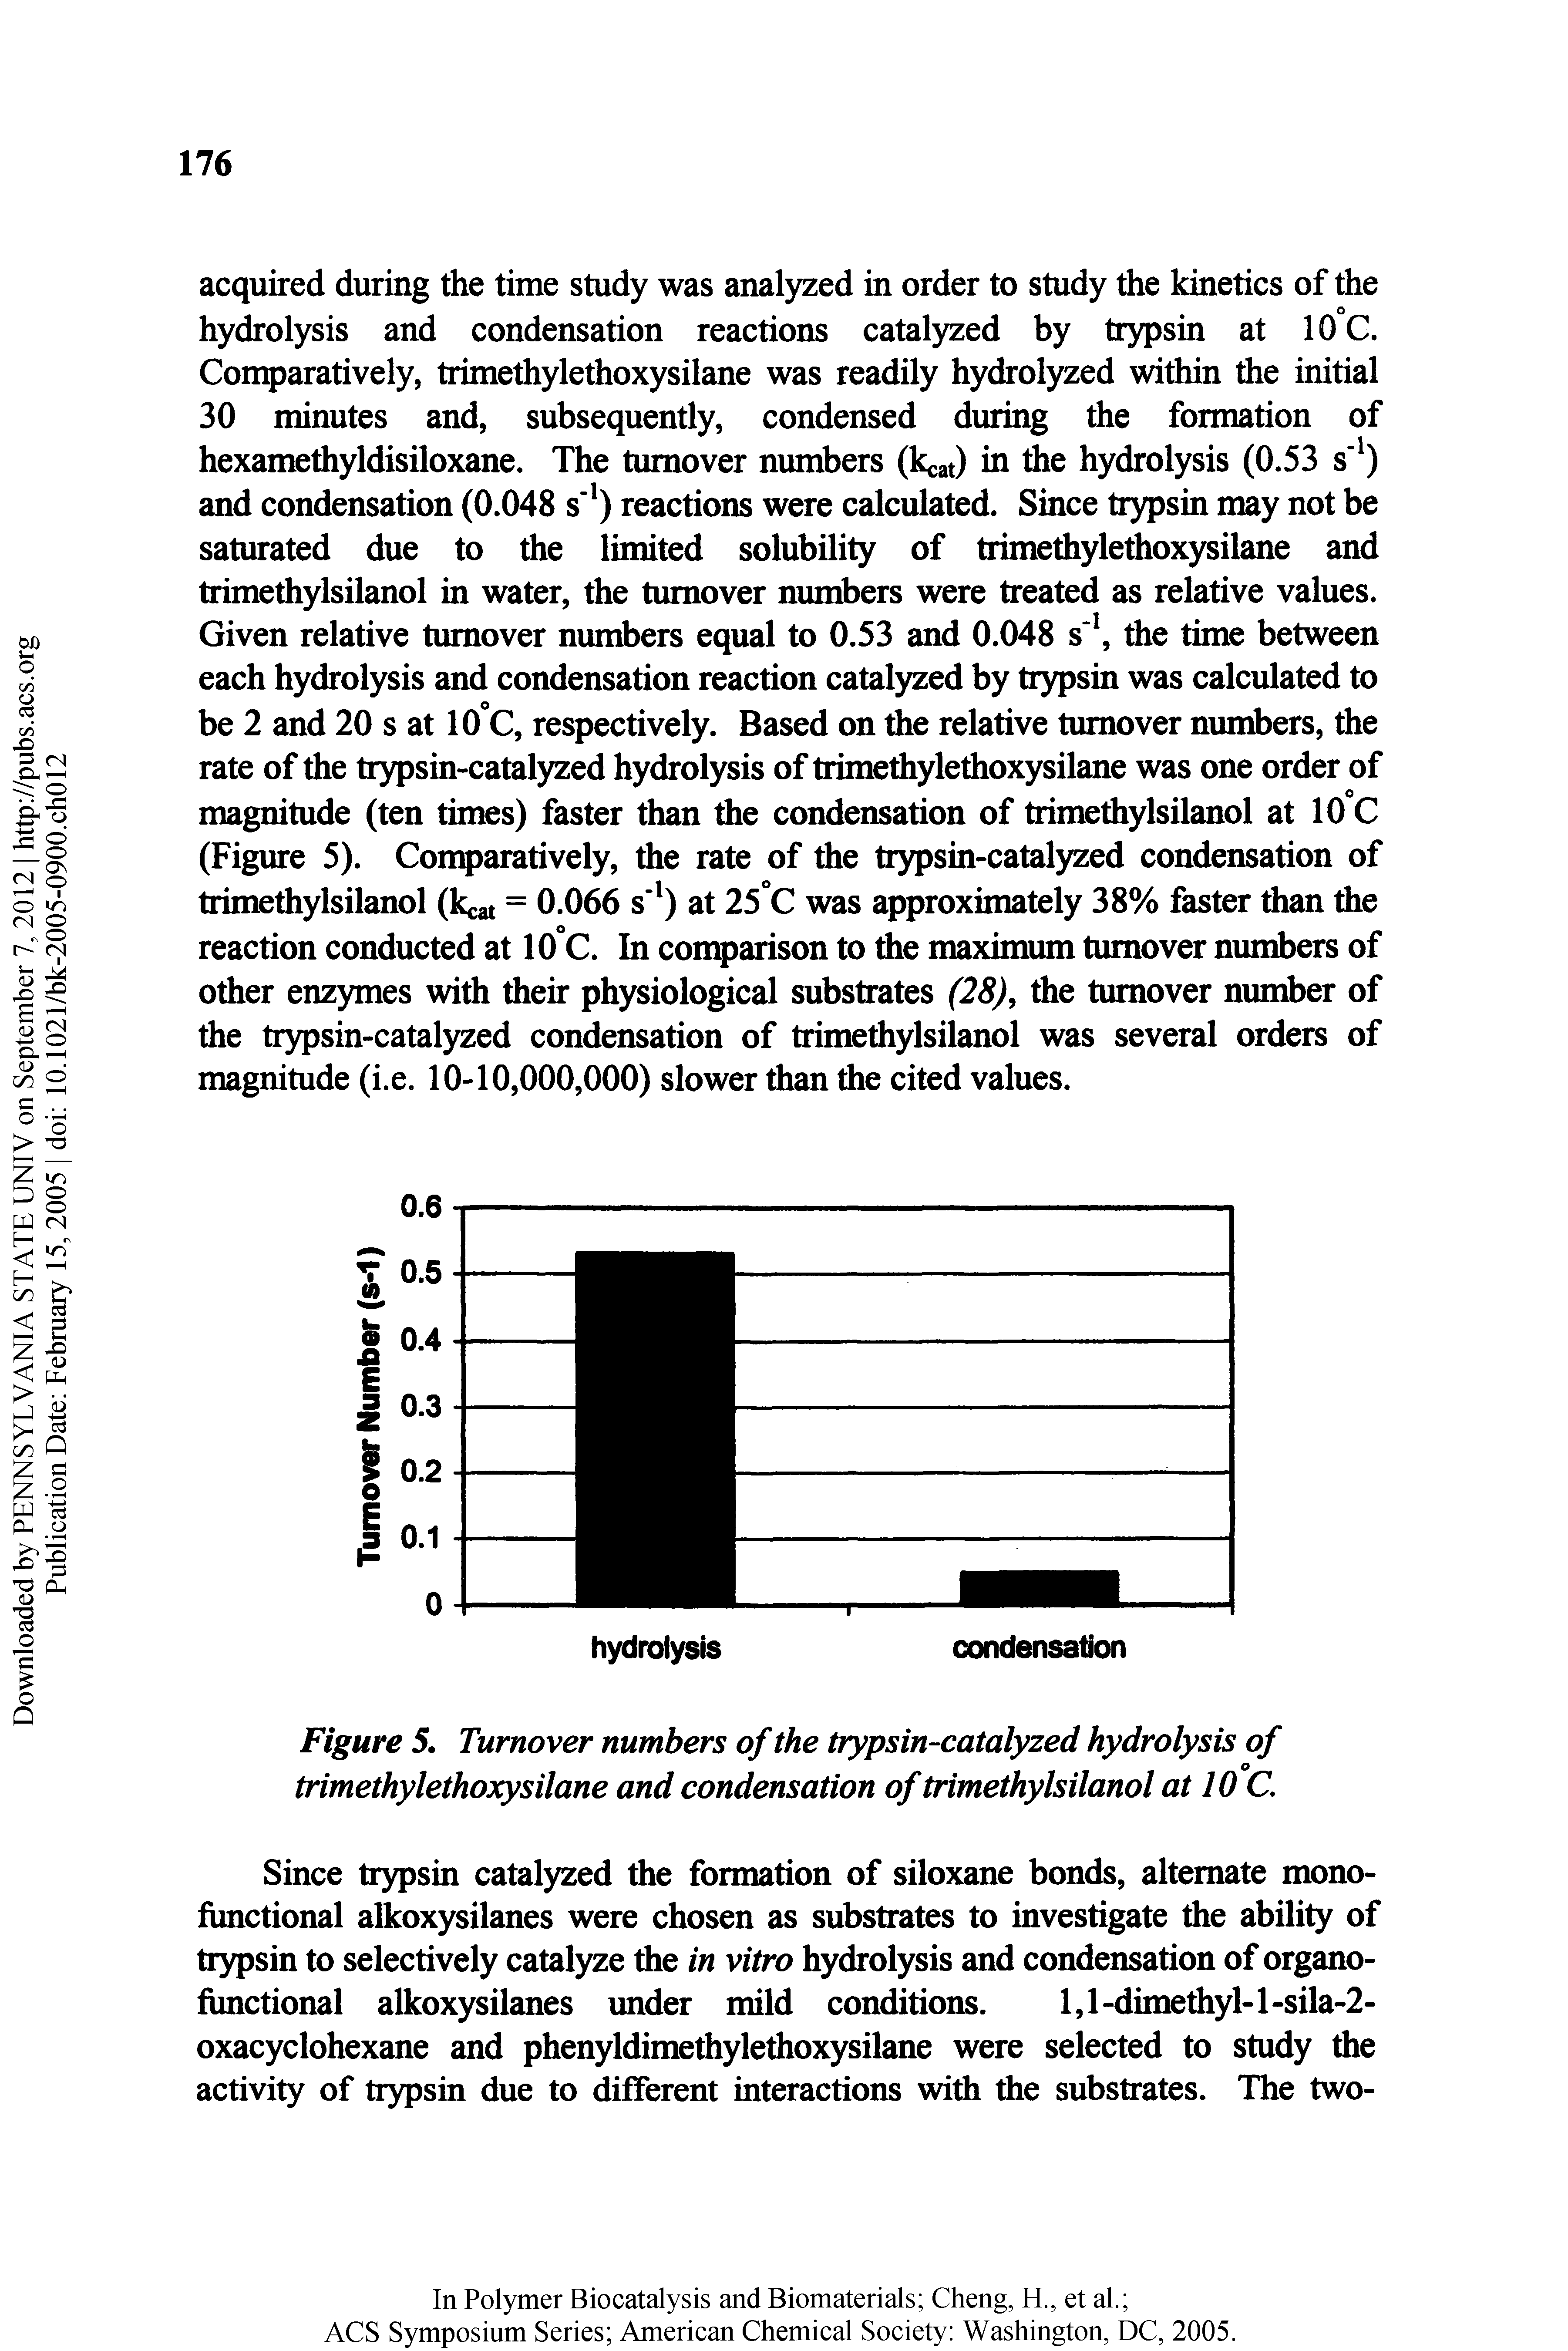 Figure 5. Turnover numbers of the trypsin-catalyzed hydrolysis of trimethylethoxysilane and condensation of trimethylsilanol at 10 C.